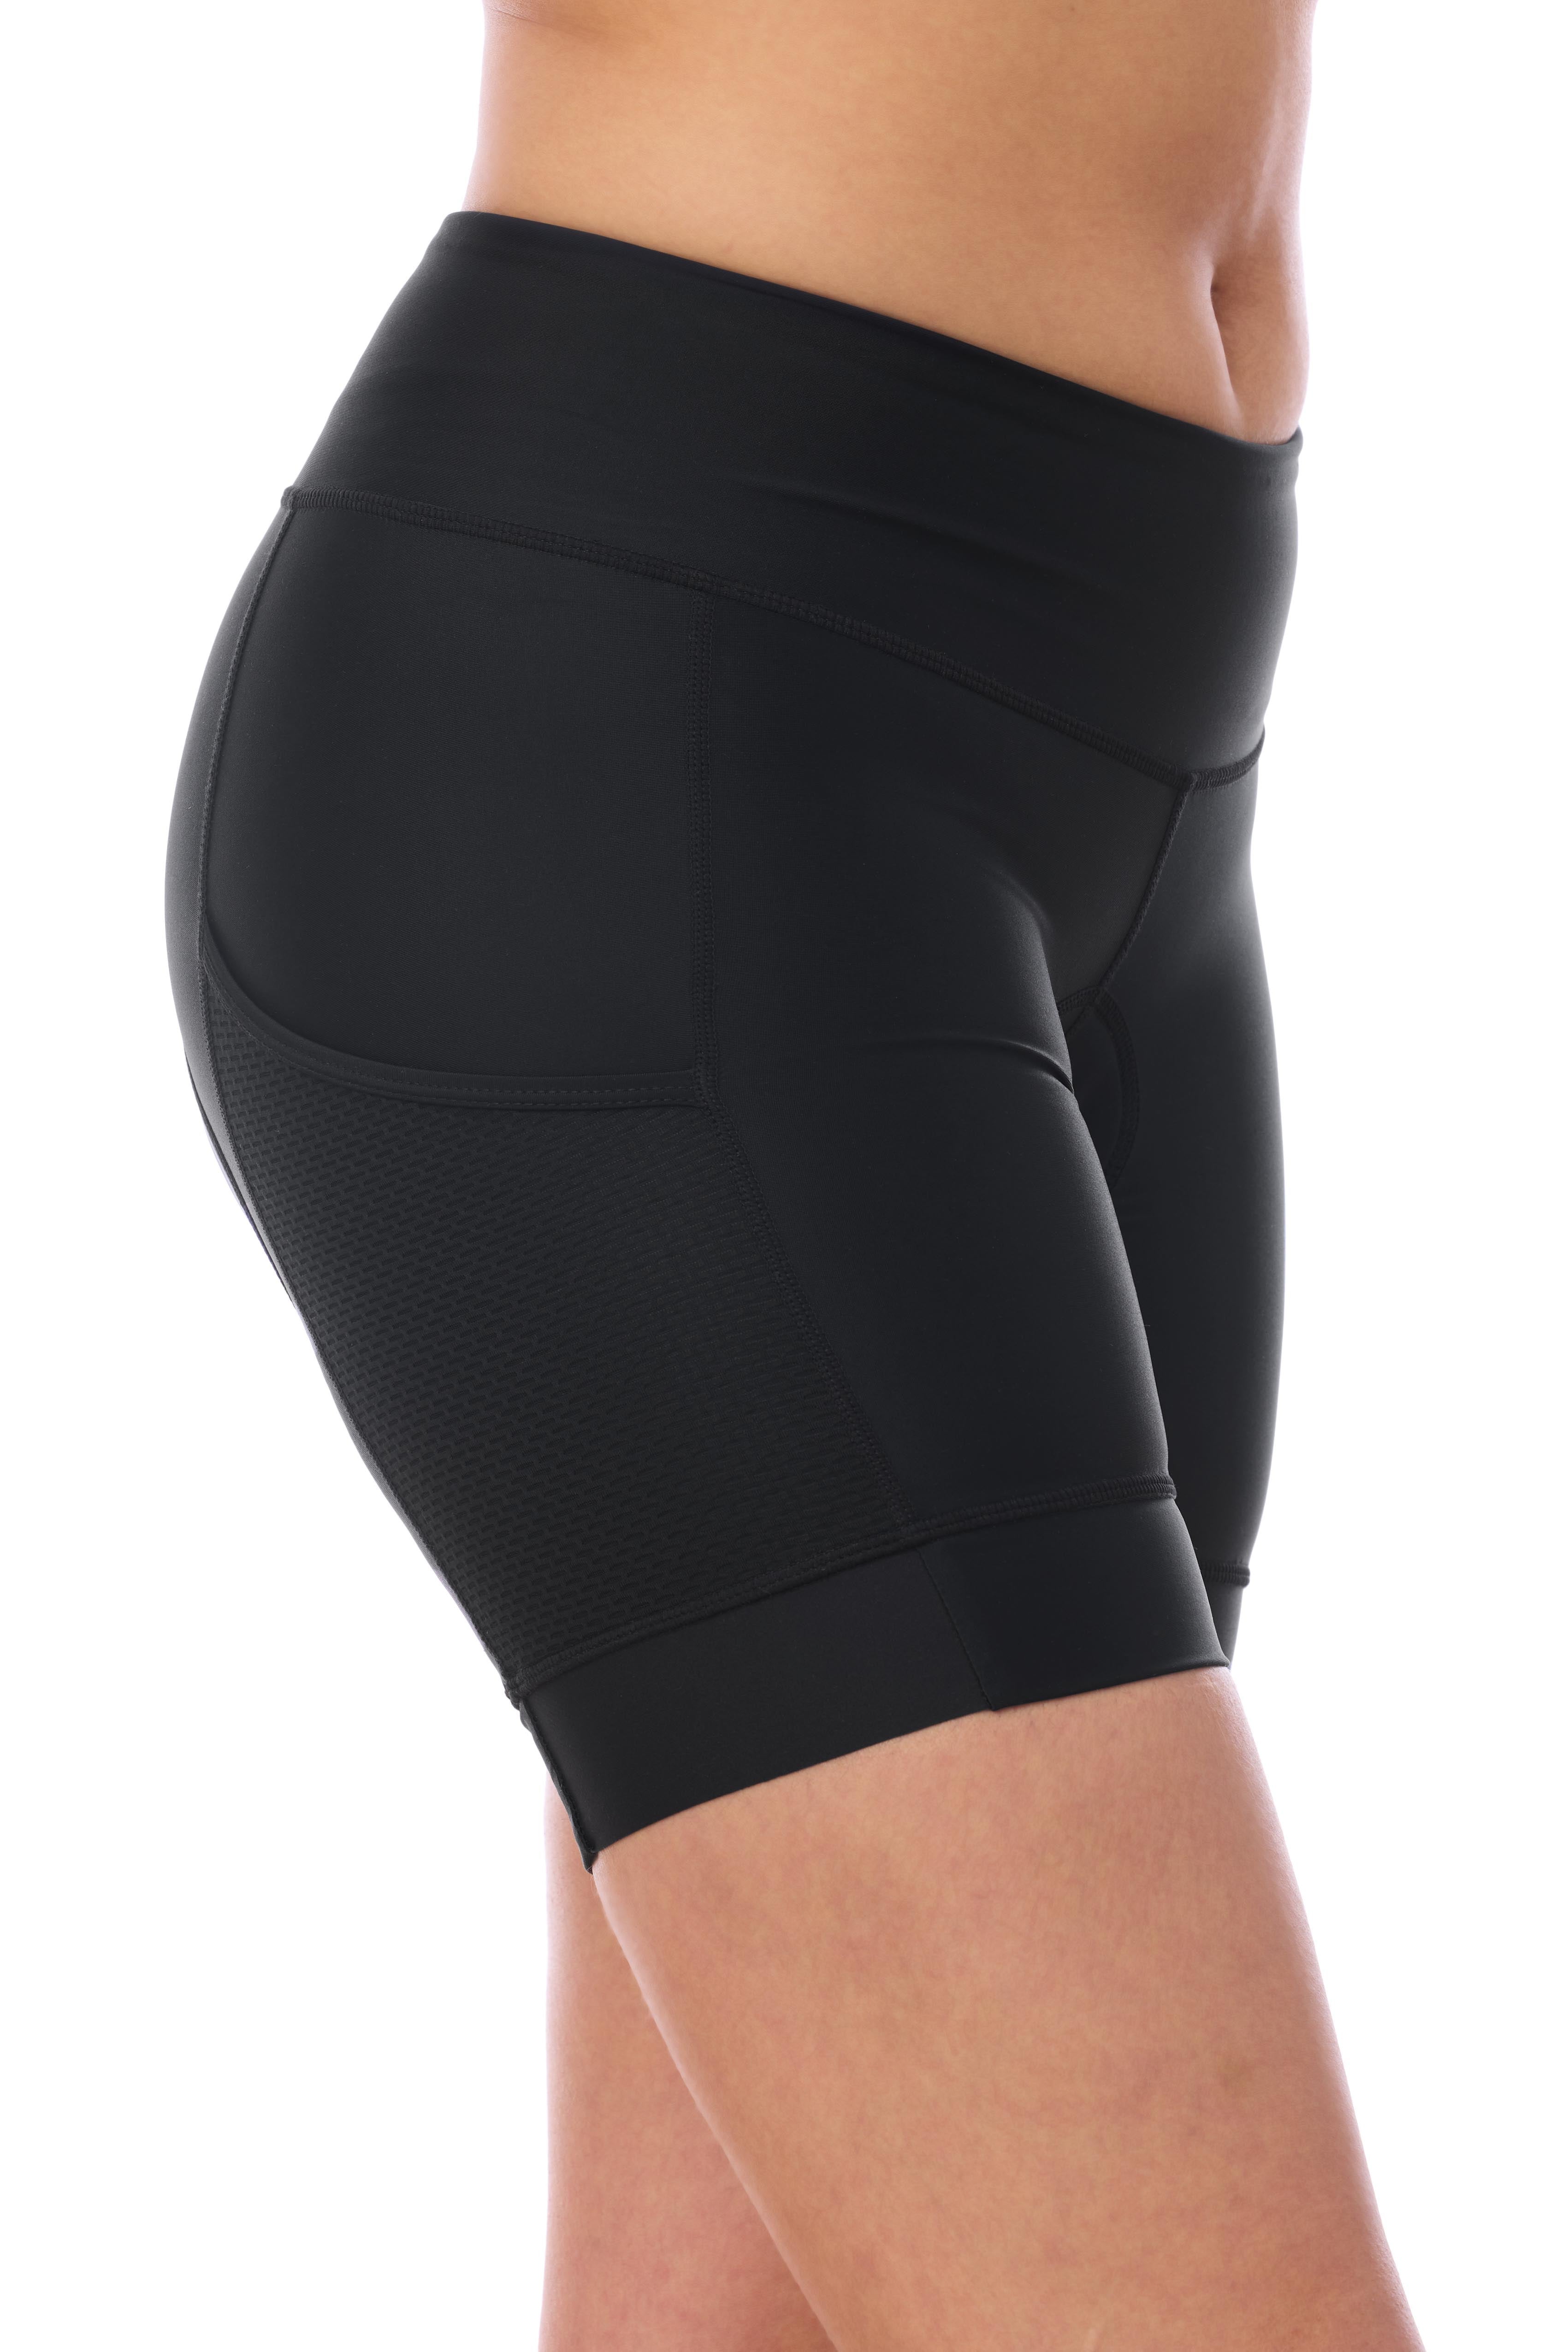 JolieRide Cycling shorts mid-thigh fit cycling shorts with 15cm inseam and UV protection